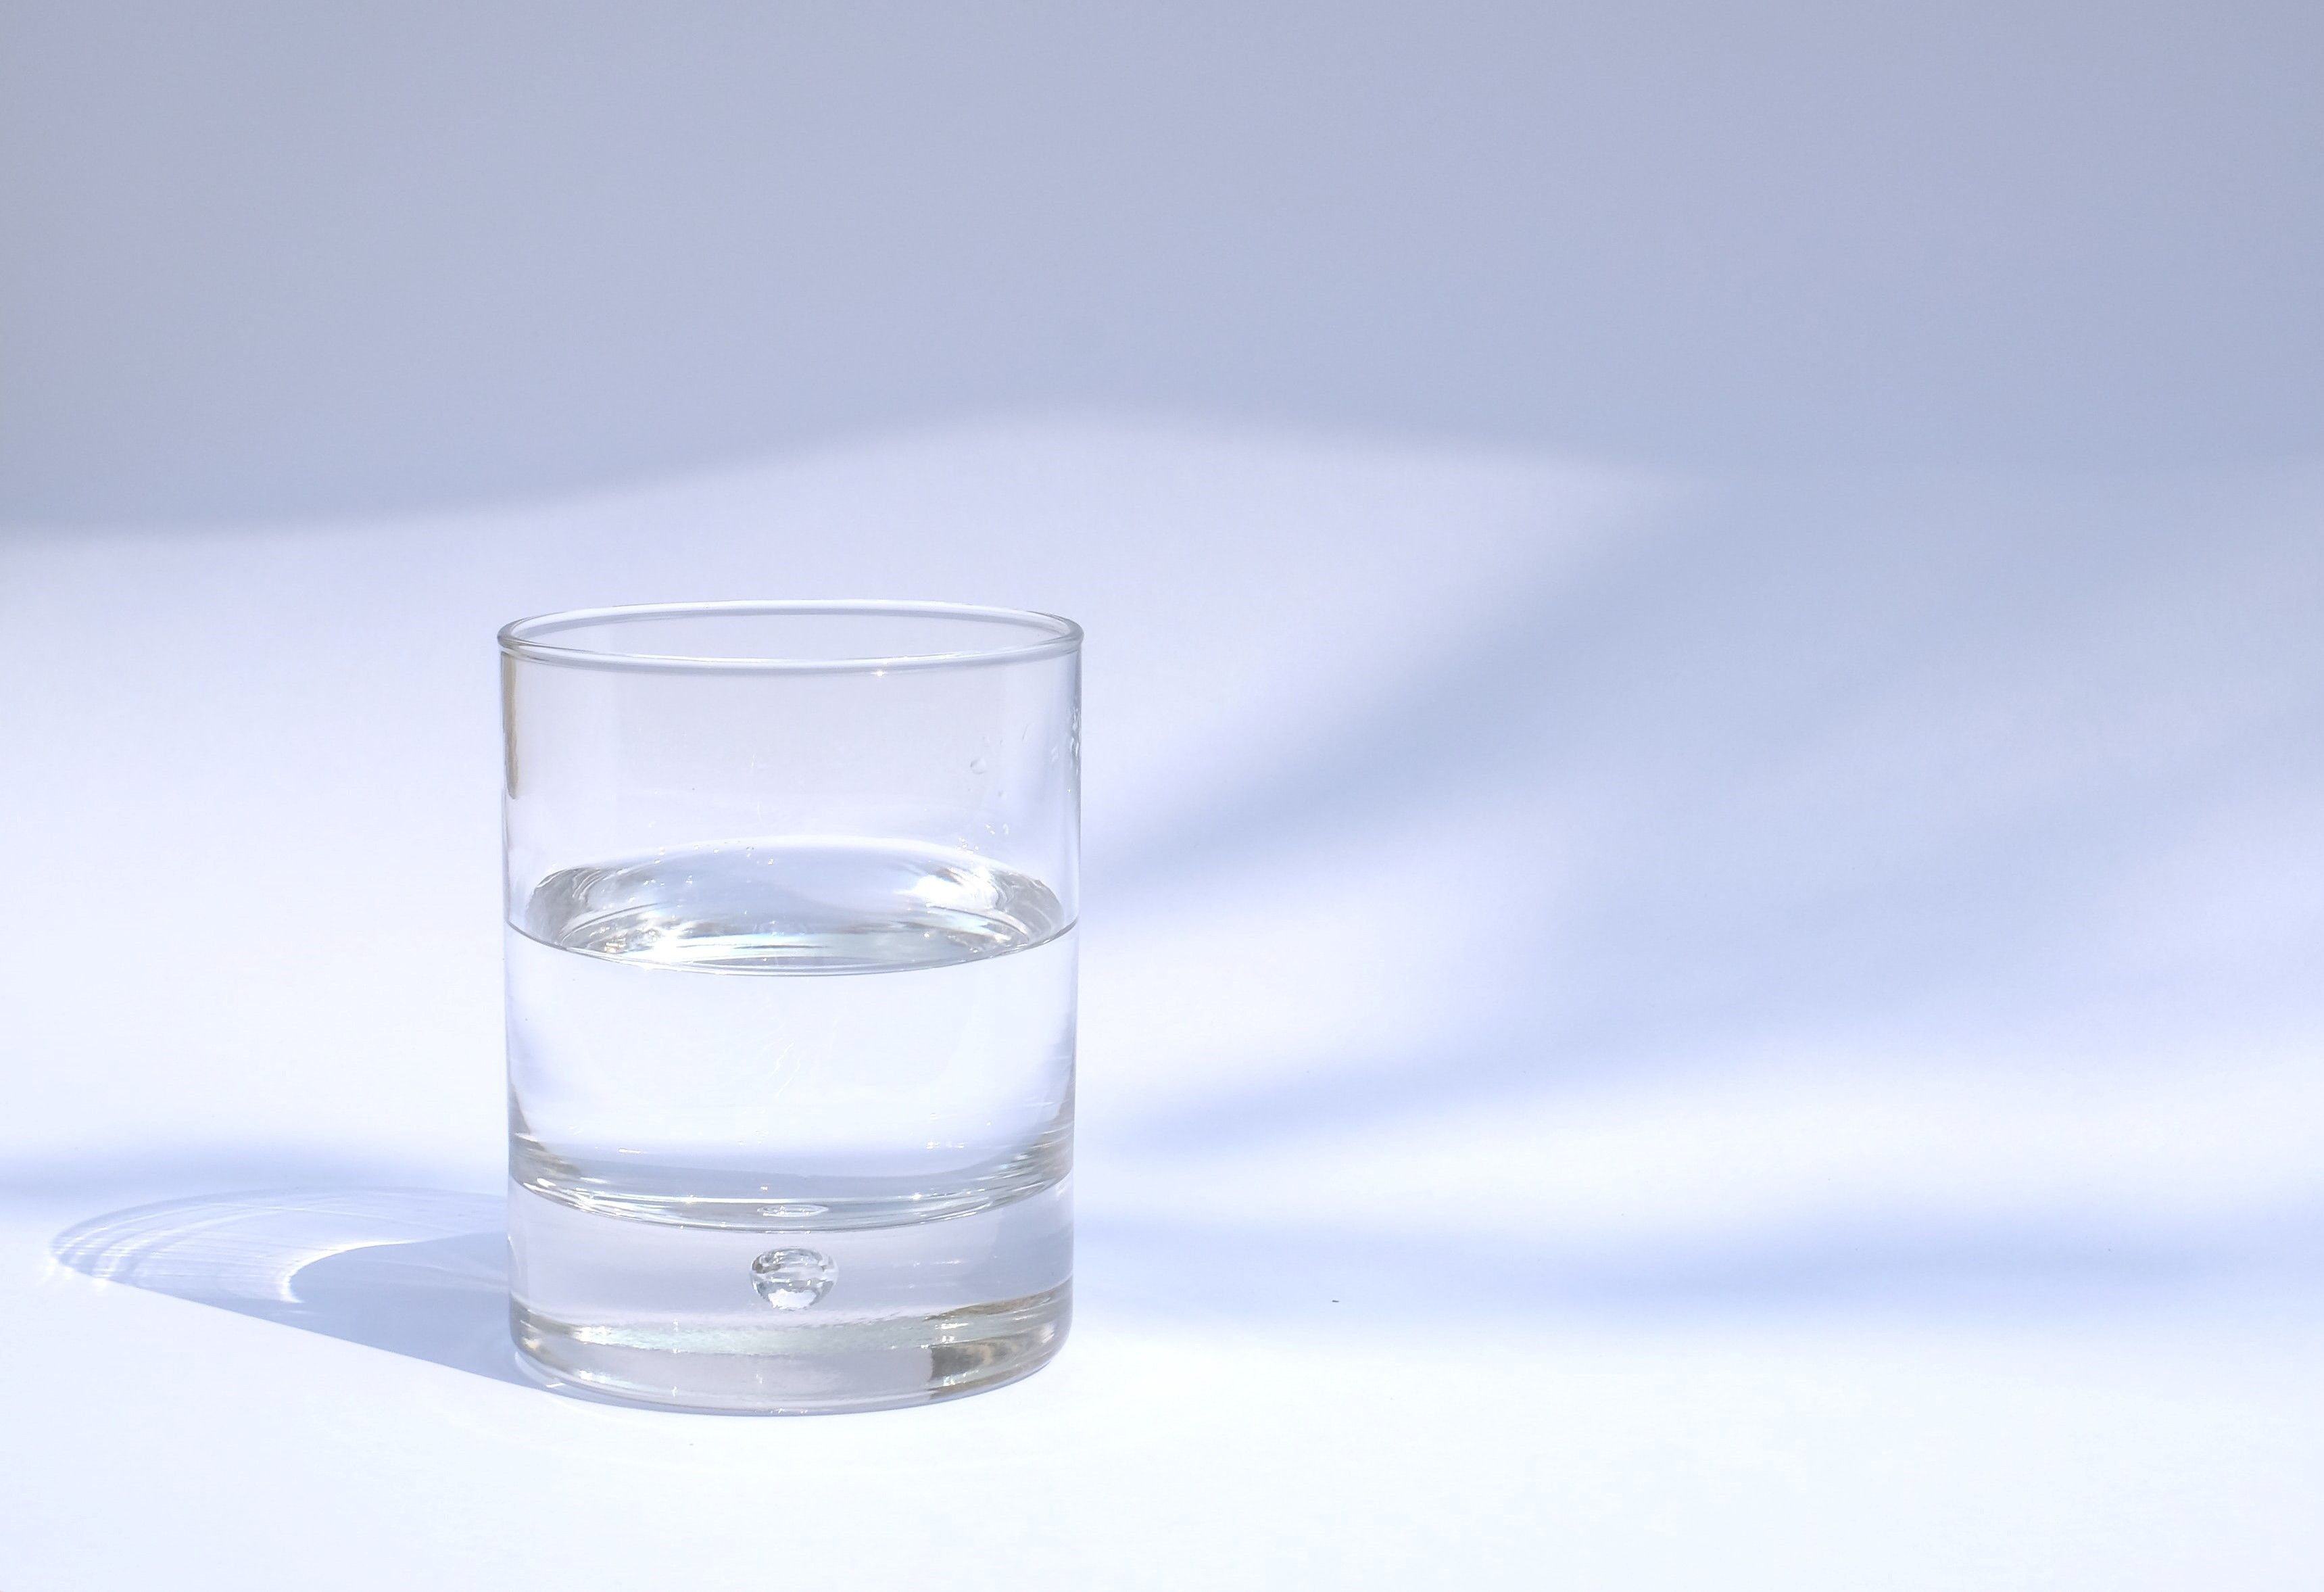 A glass of water on a white cyc.